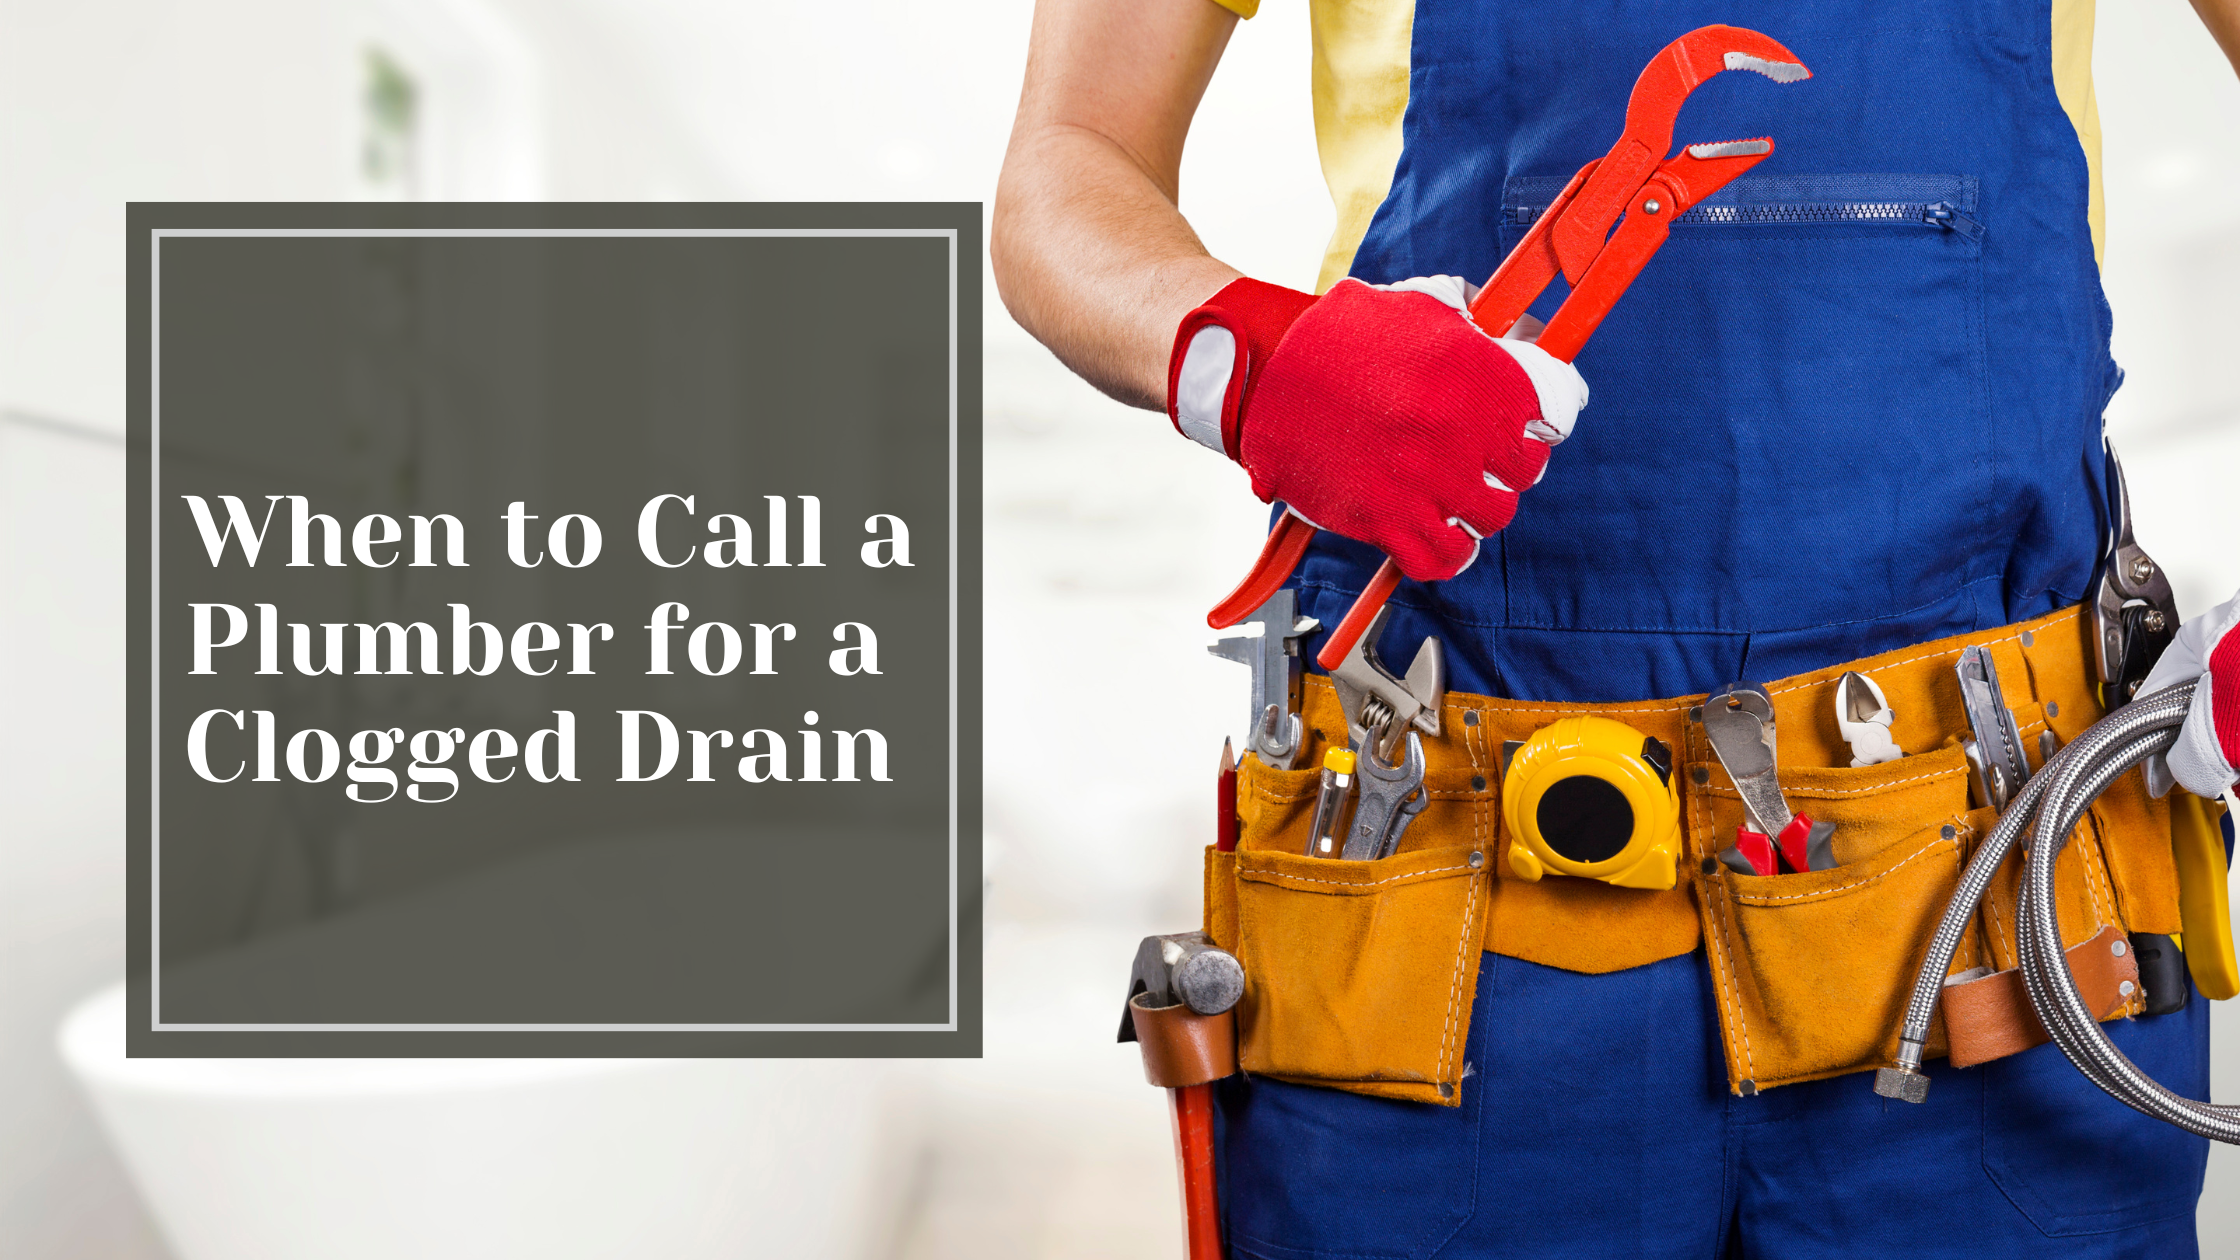 When to Call a Plumber for a Clogged Drain